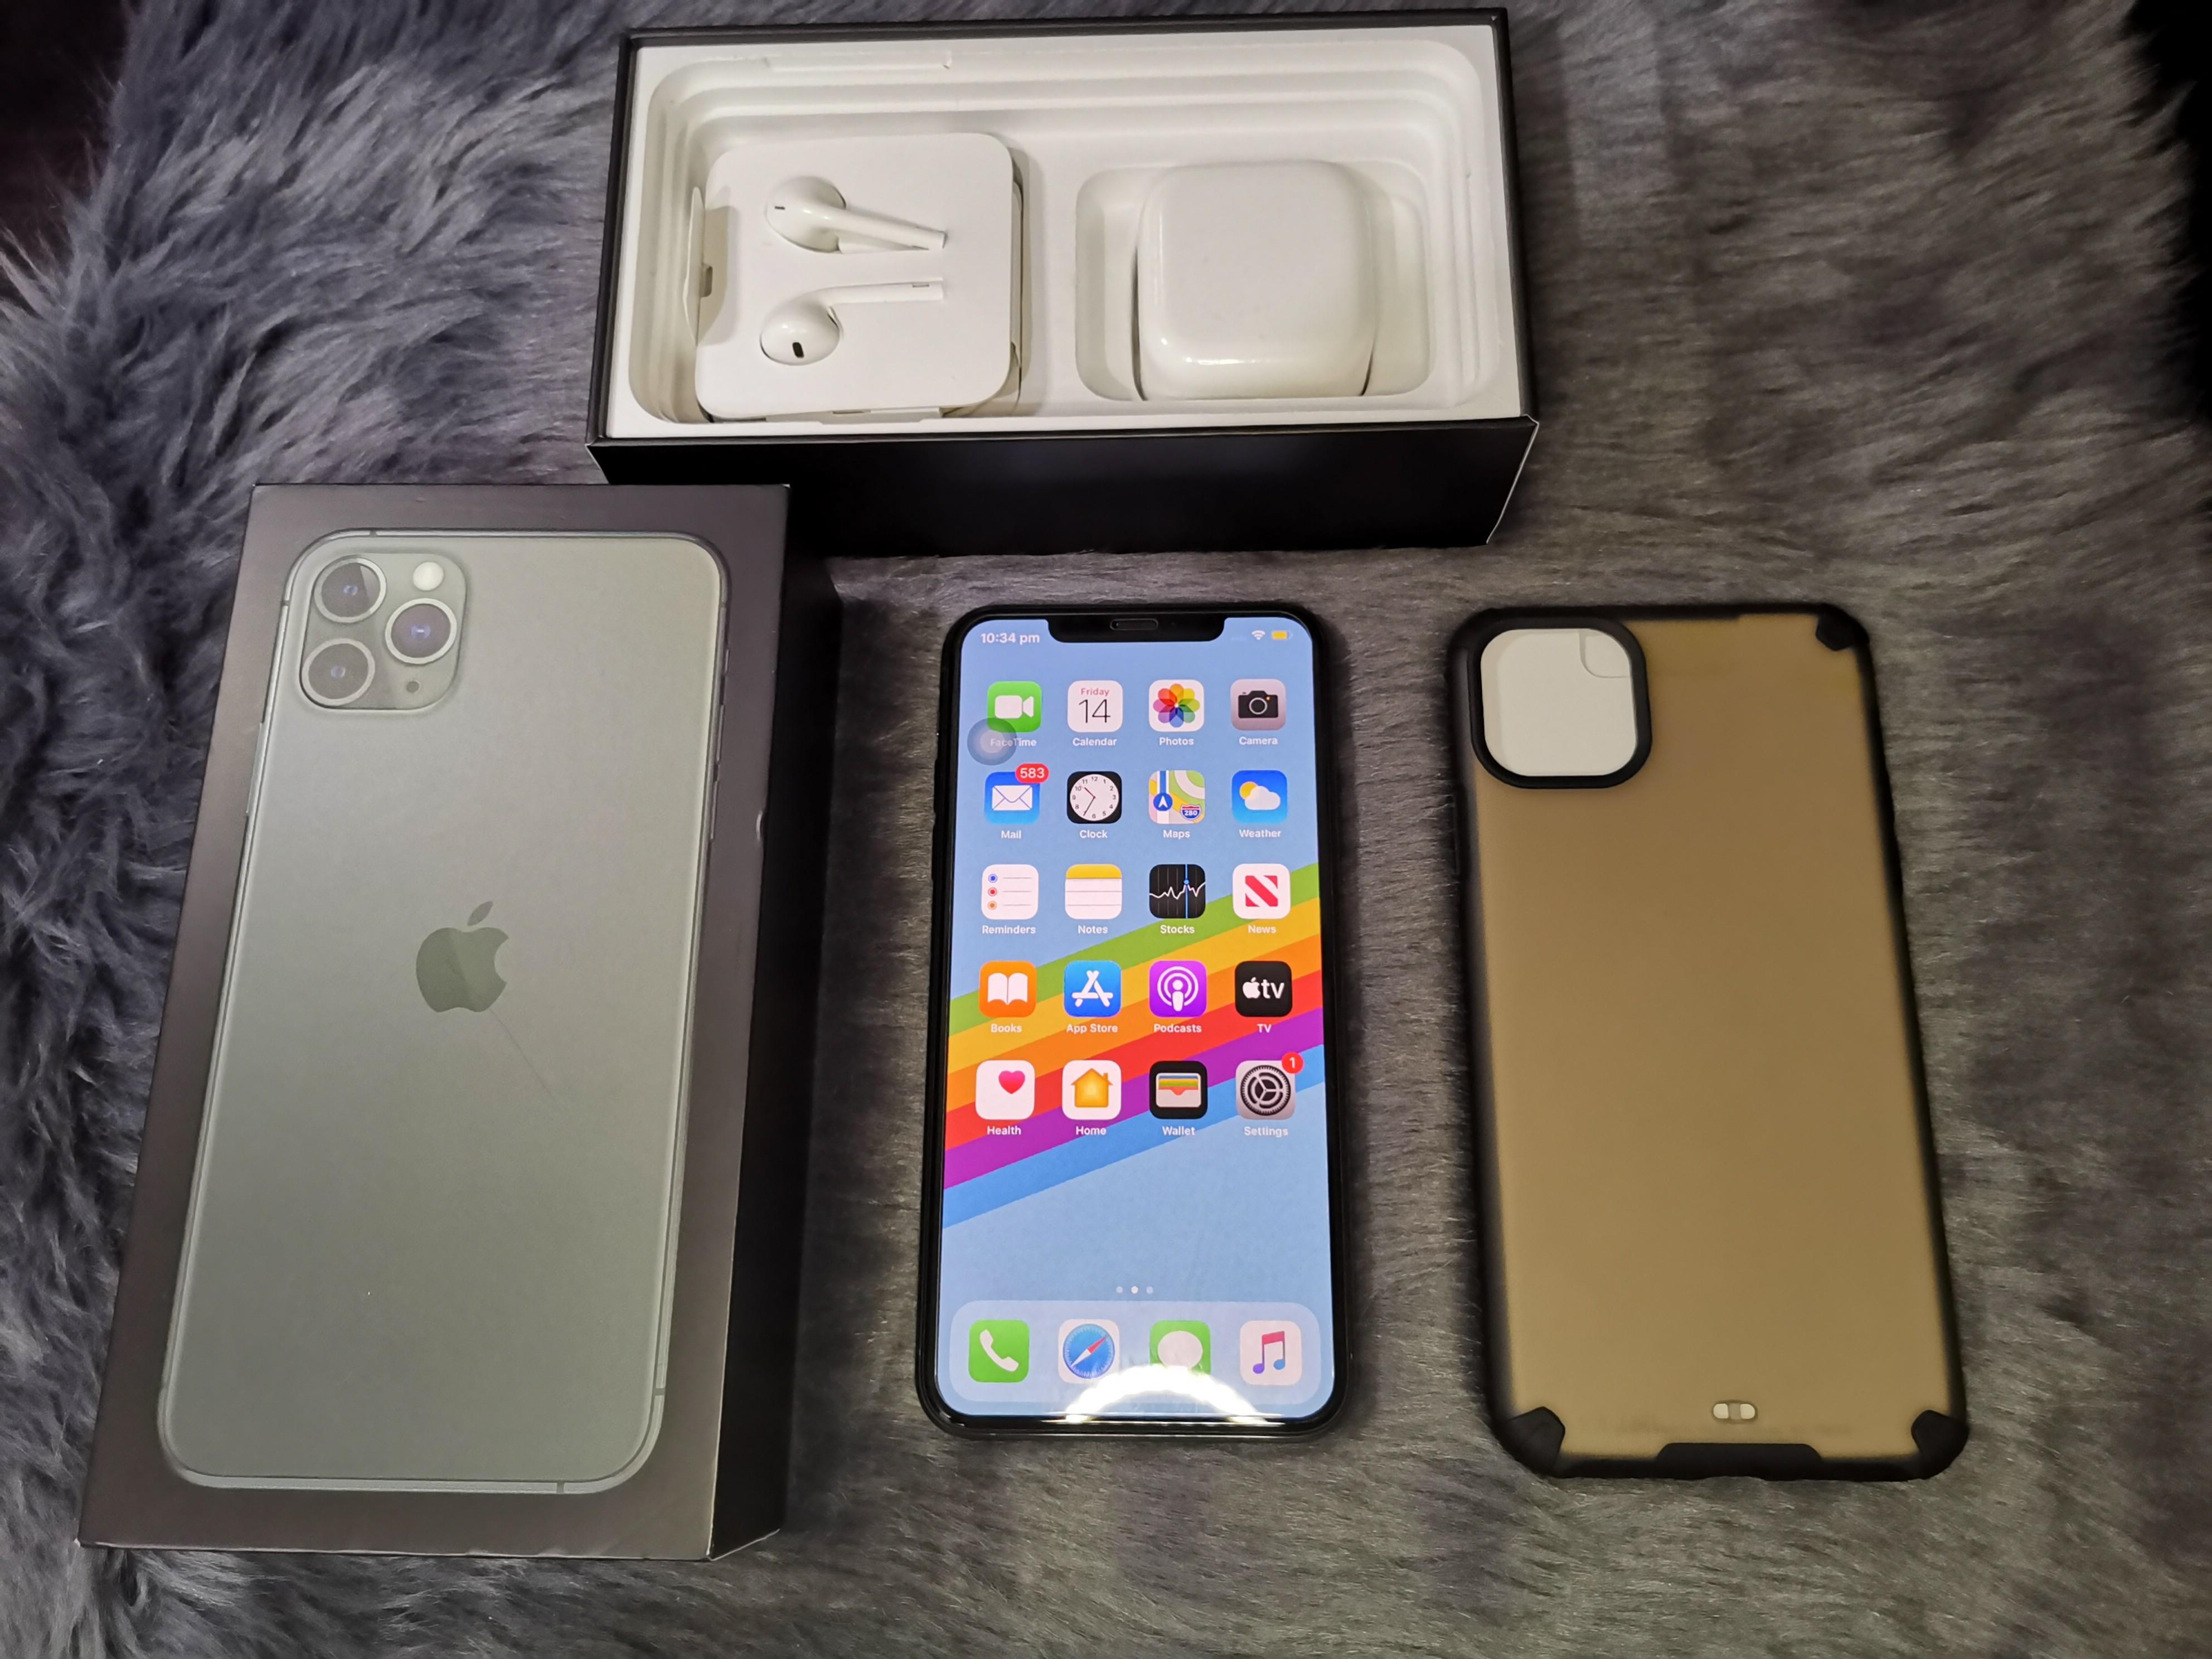 Apple Iphone 11 Pro Max 256gb Factory Unlocked Midnight Green Complete Mobile Phones Gadgets Mobile Phones Iphone Iphone 11 Series On Carousell